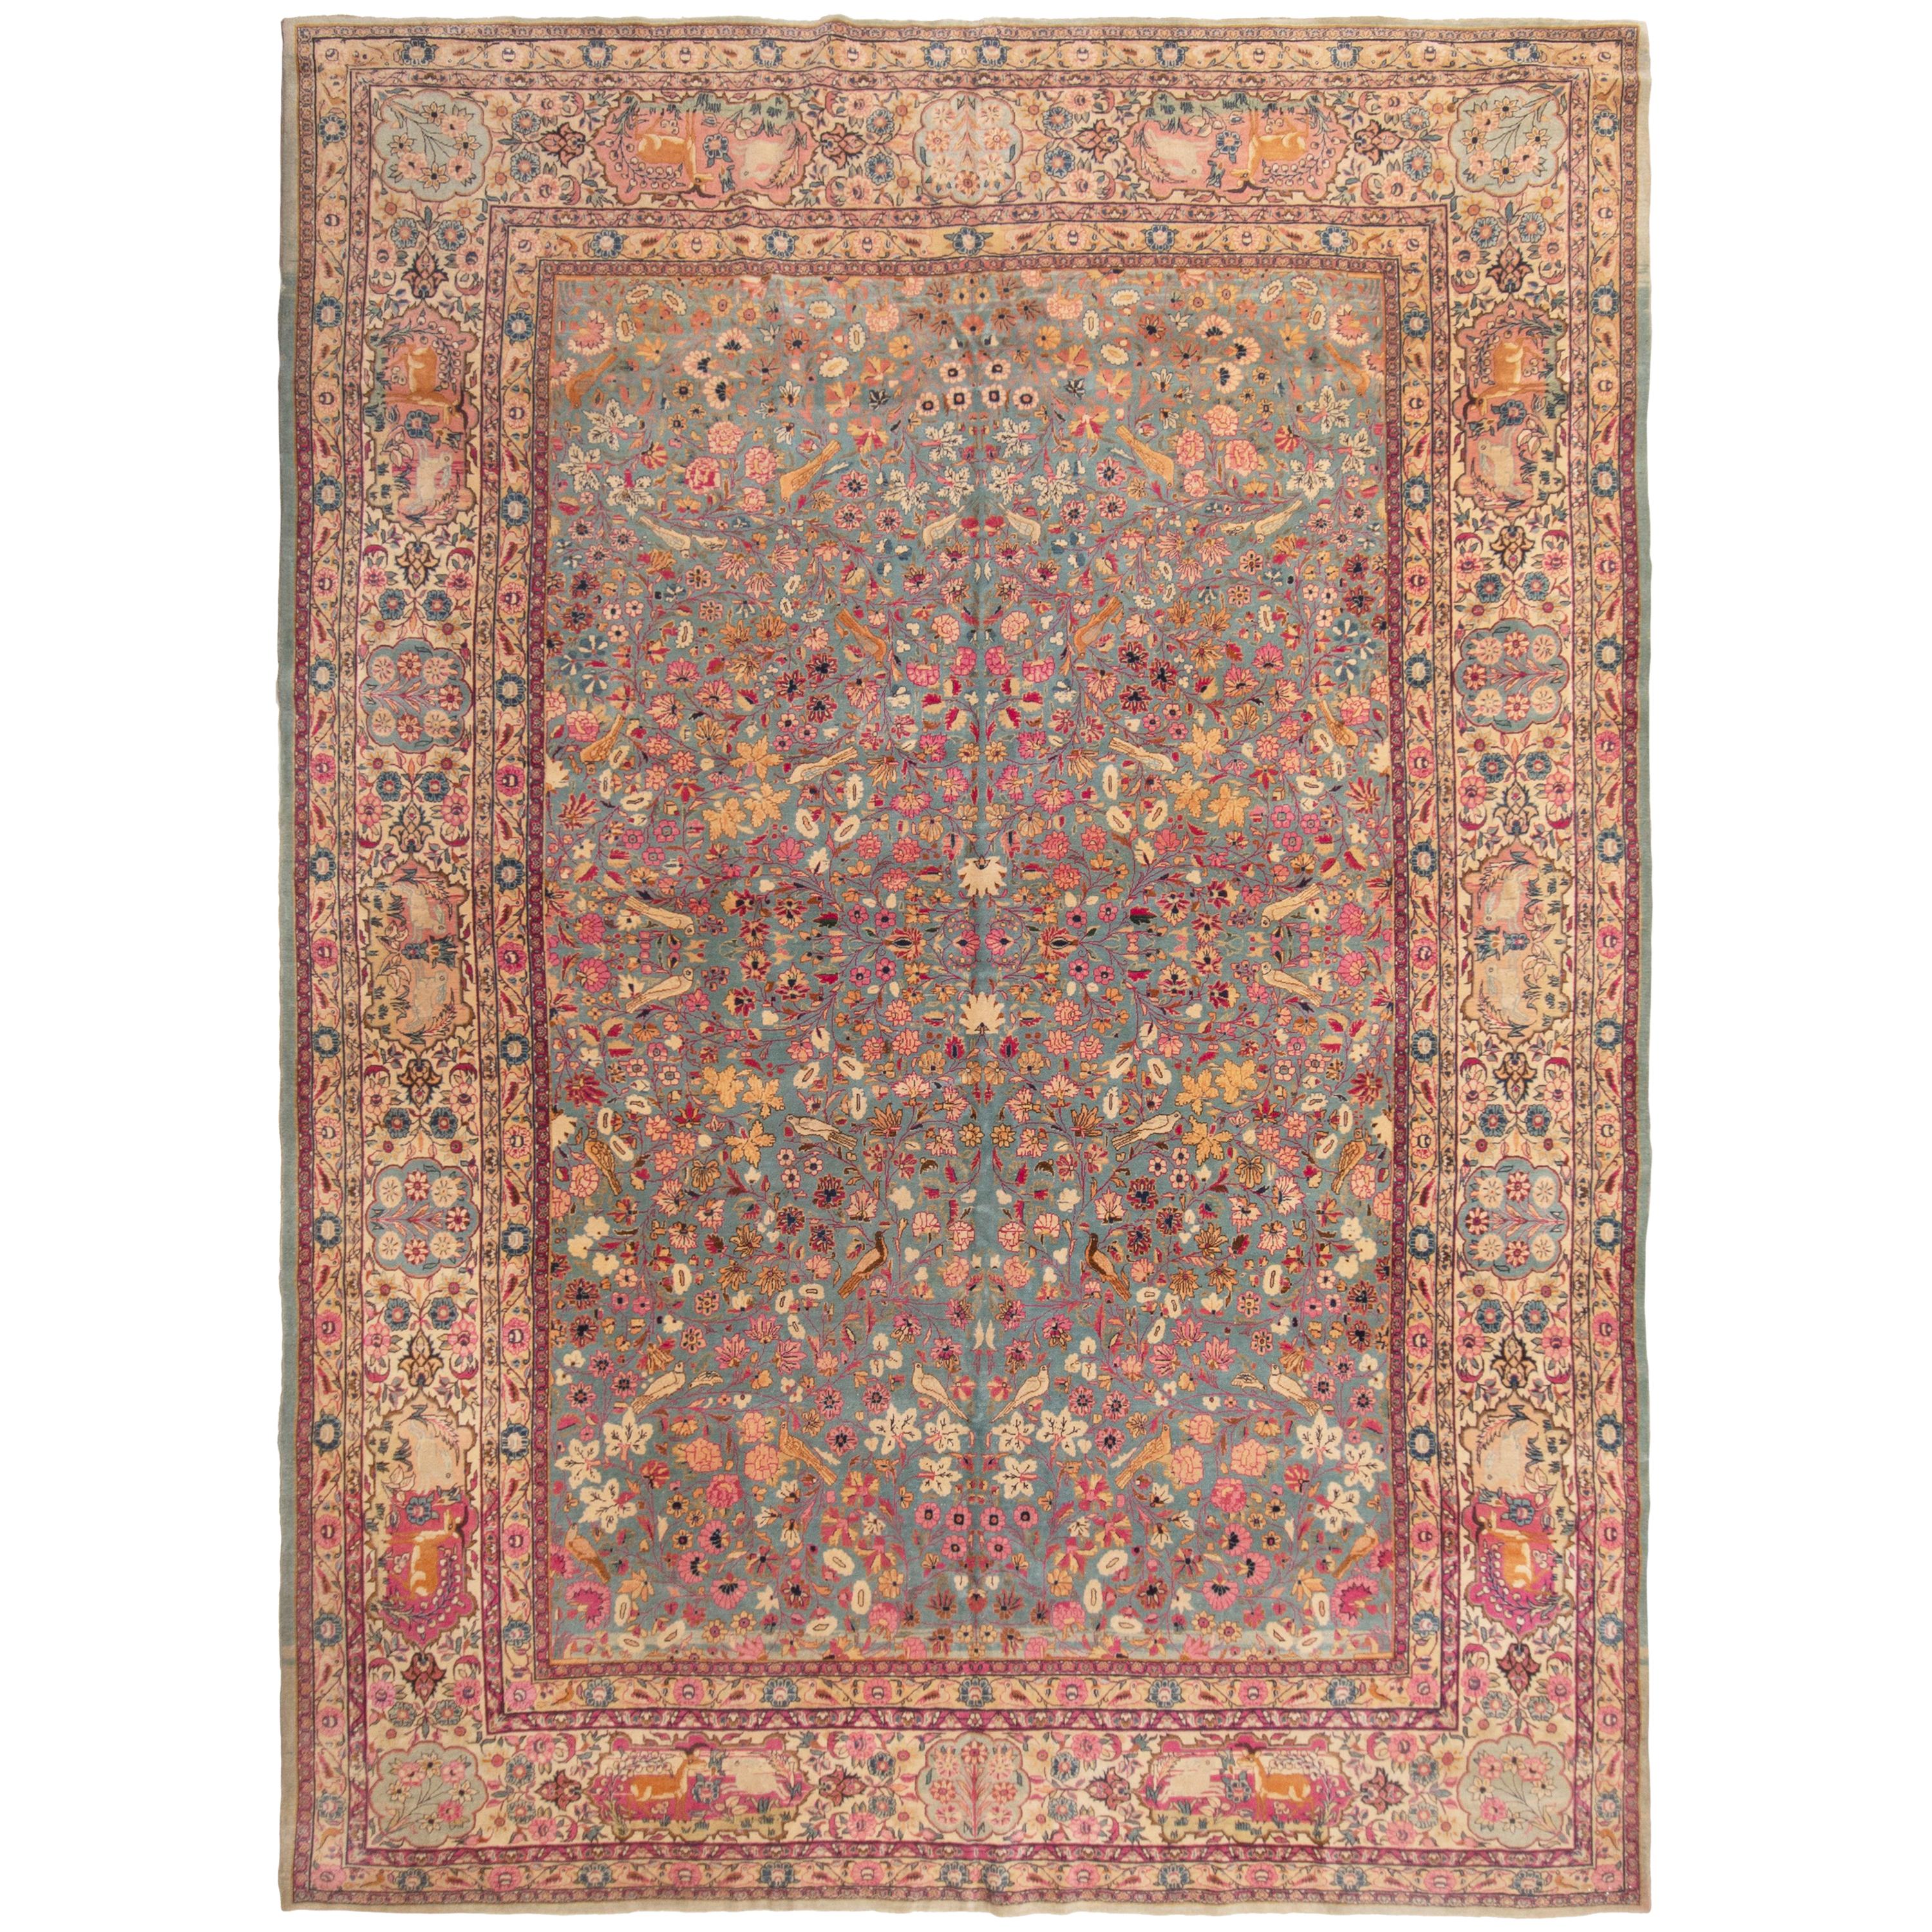 Antique Signature Kashan Pink and Blue Wool Rug with All-Over Floral Patterns